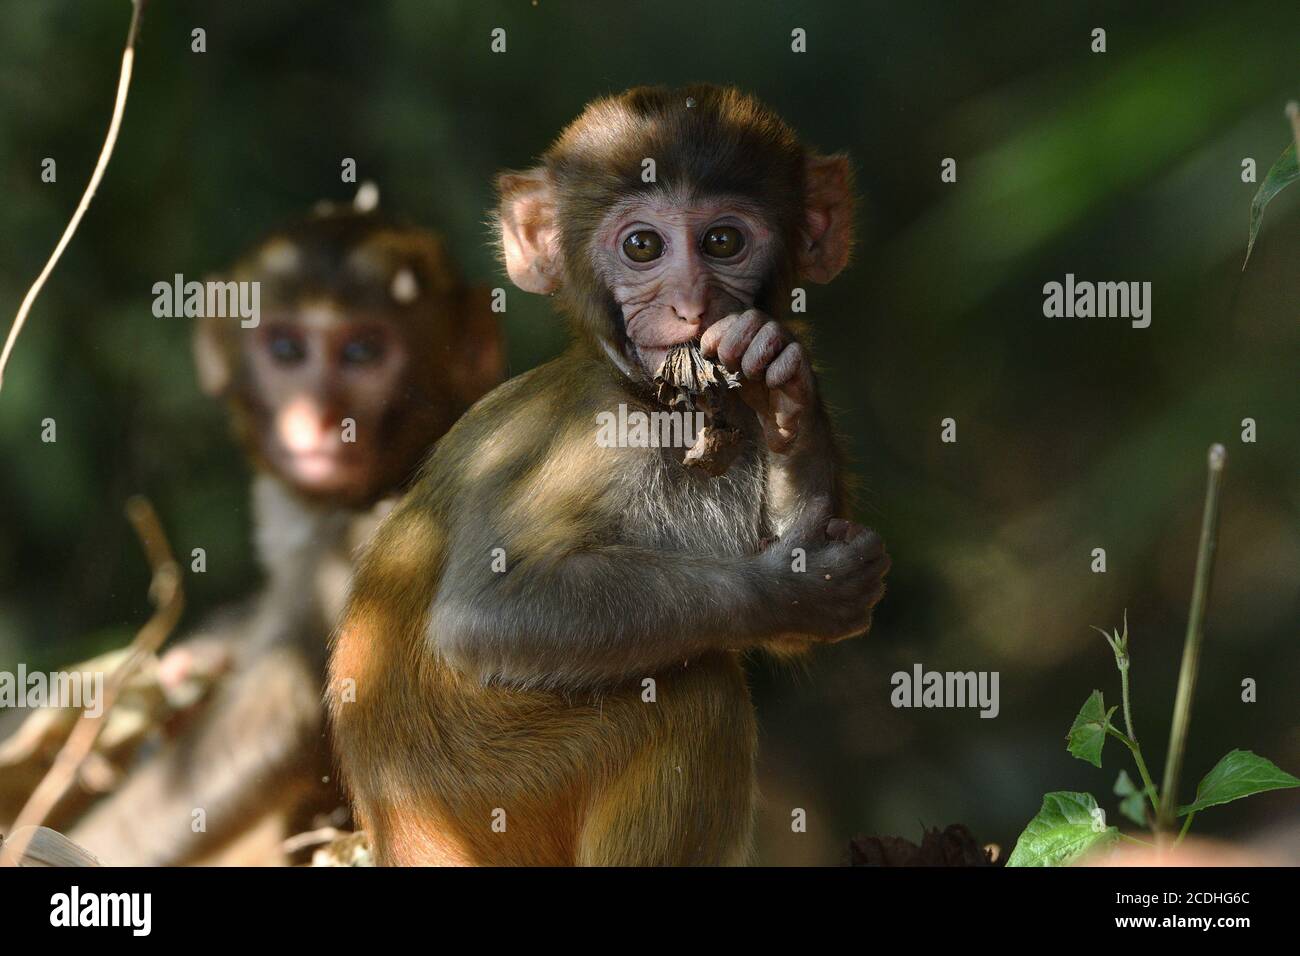 Baby Monkey Is Posing For A Photo Stock Photo